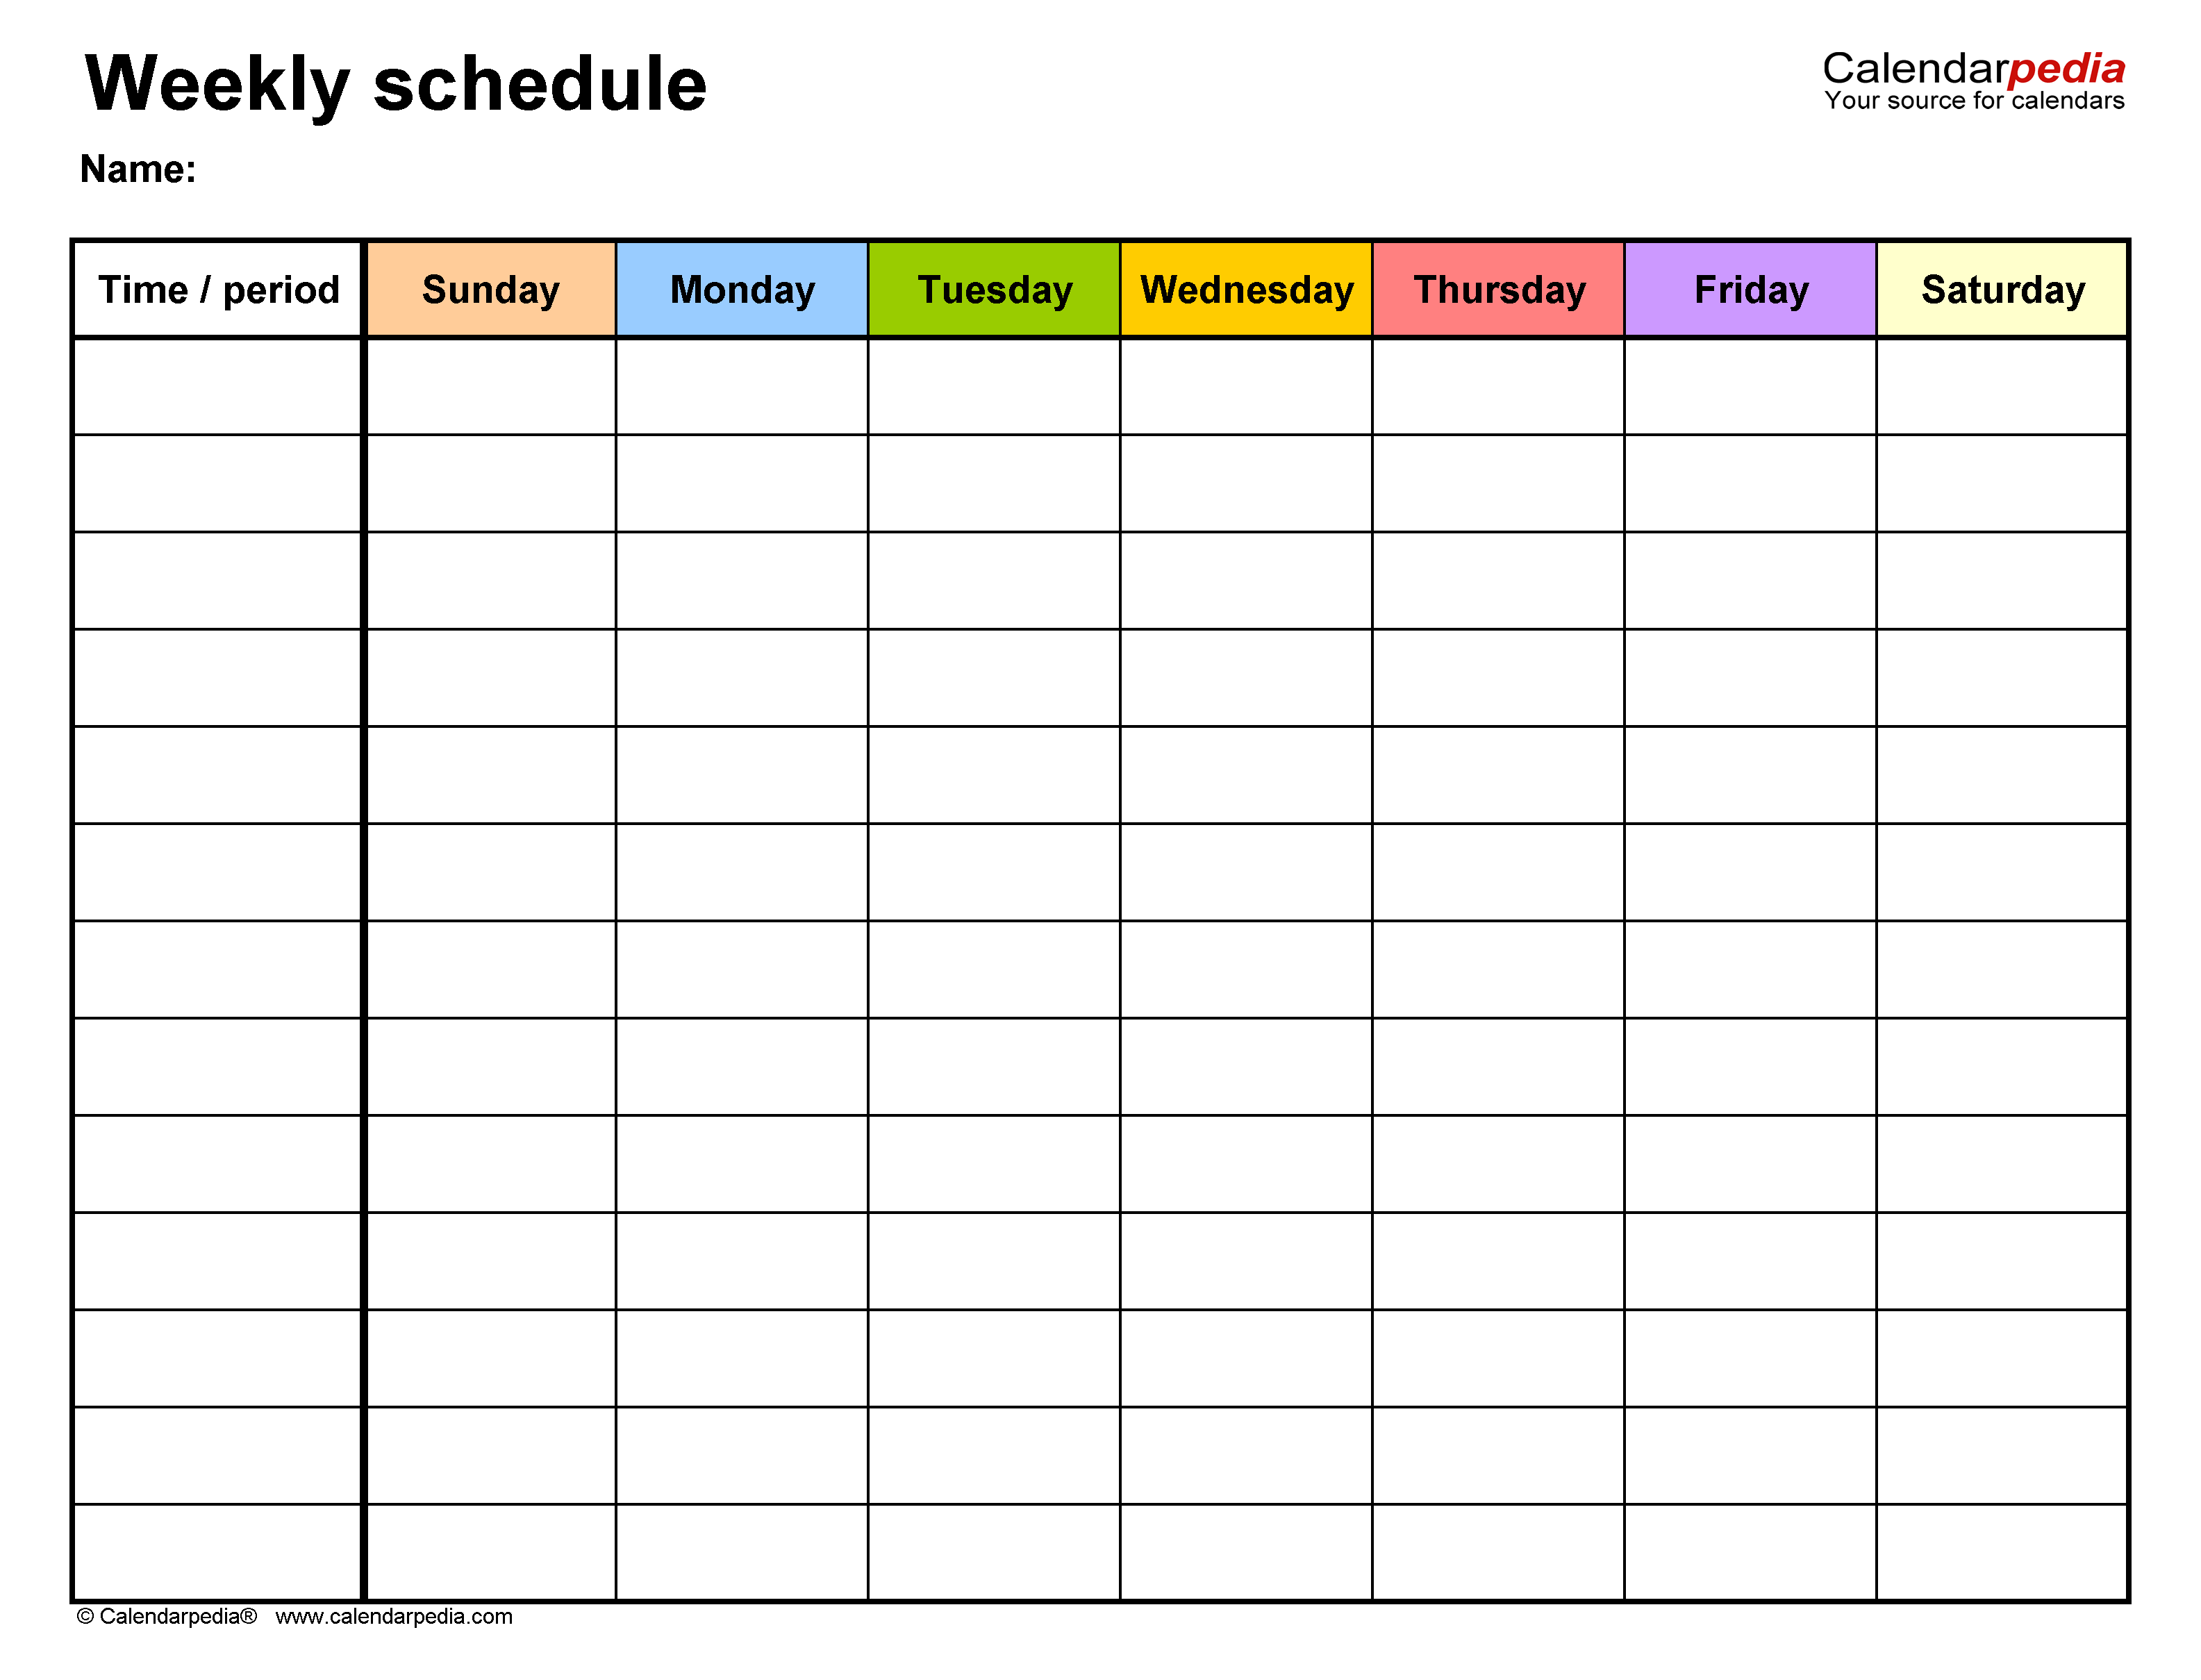 Free Weekly Schedules for Excel - 10 Templates Throughout Programme Itinerary Template Inside Programme Itinerary Template